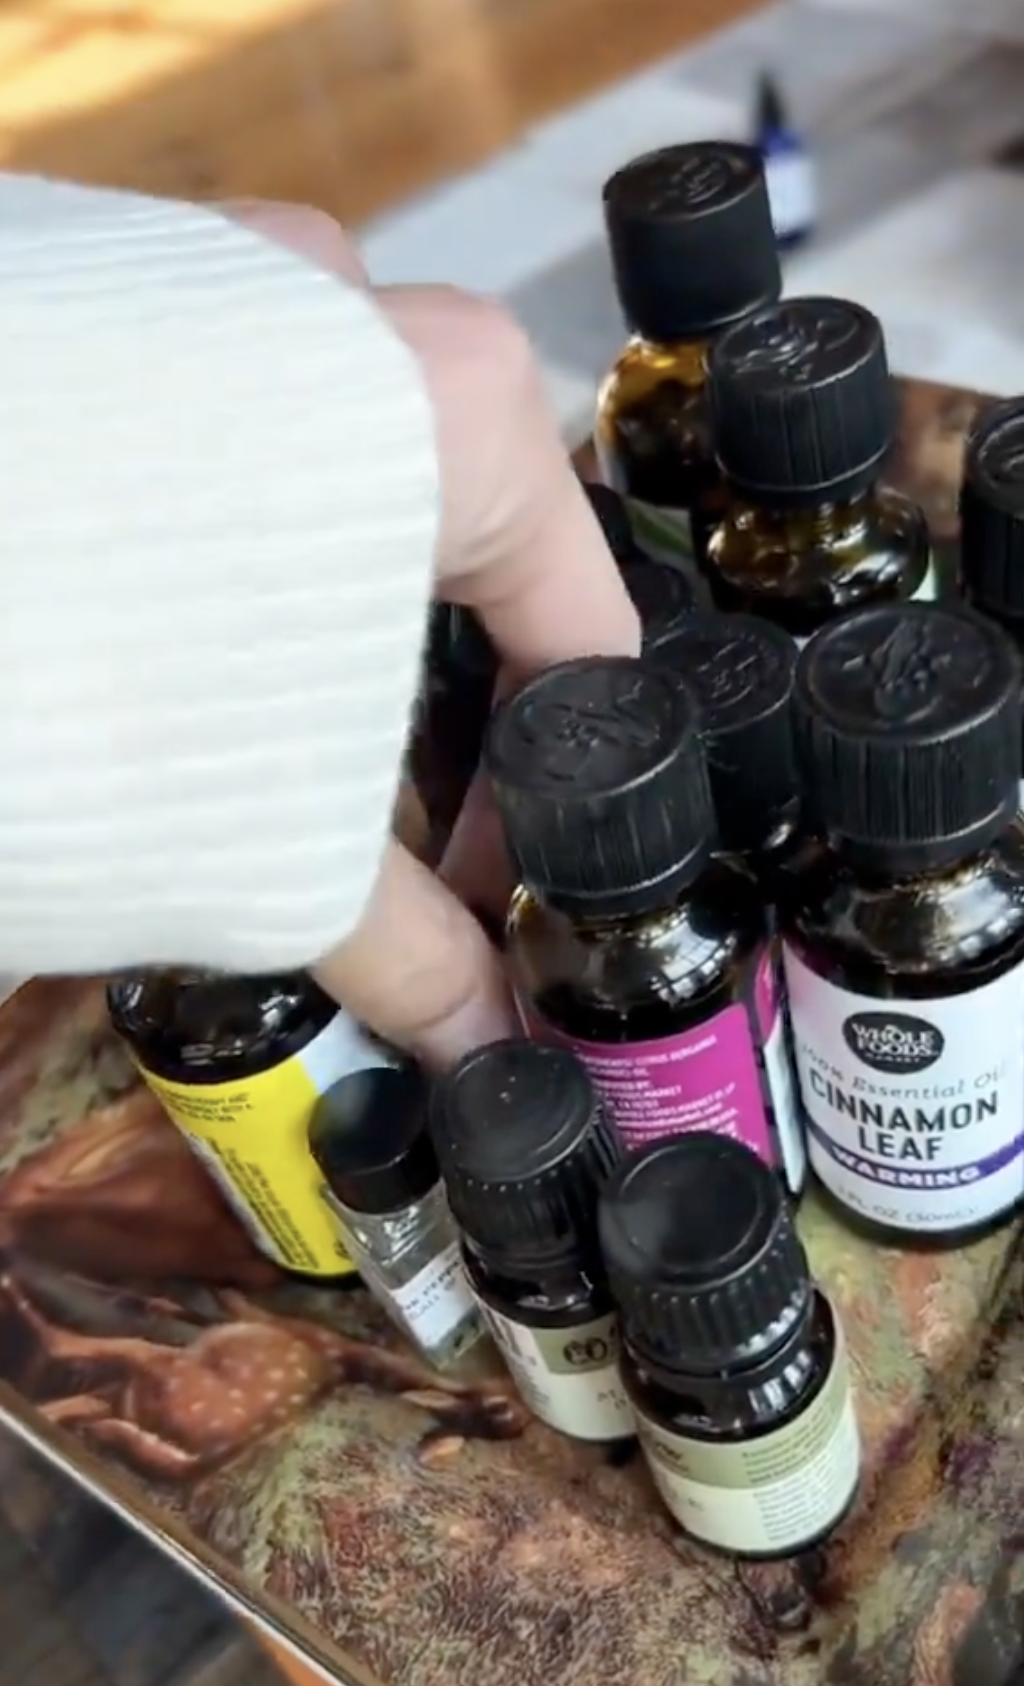 Hand selecting from various essential oil bottles on a tray